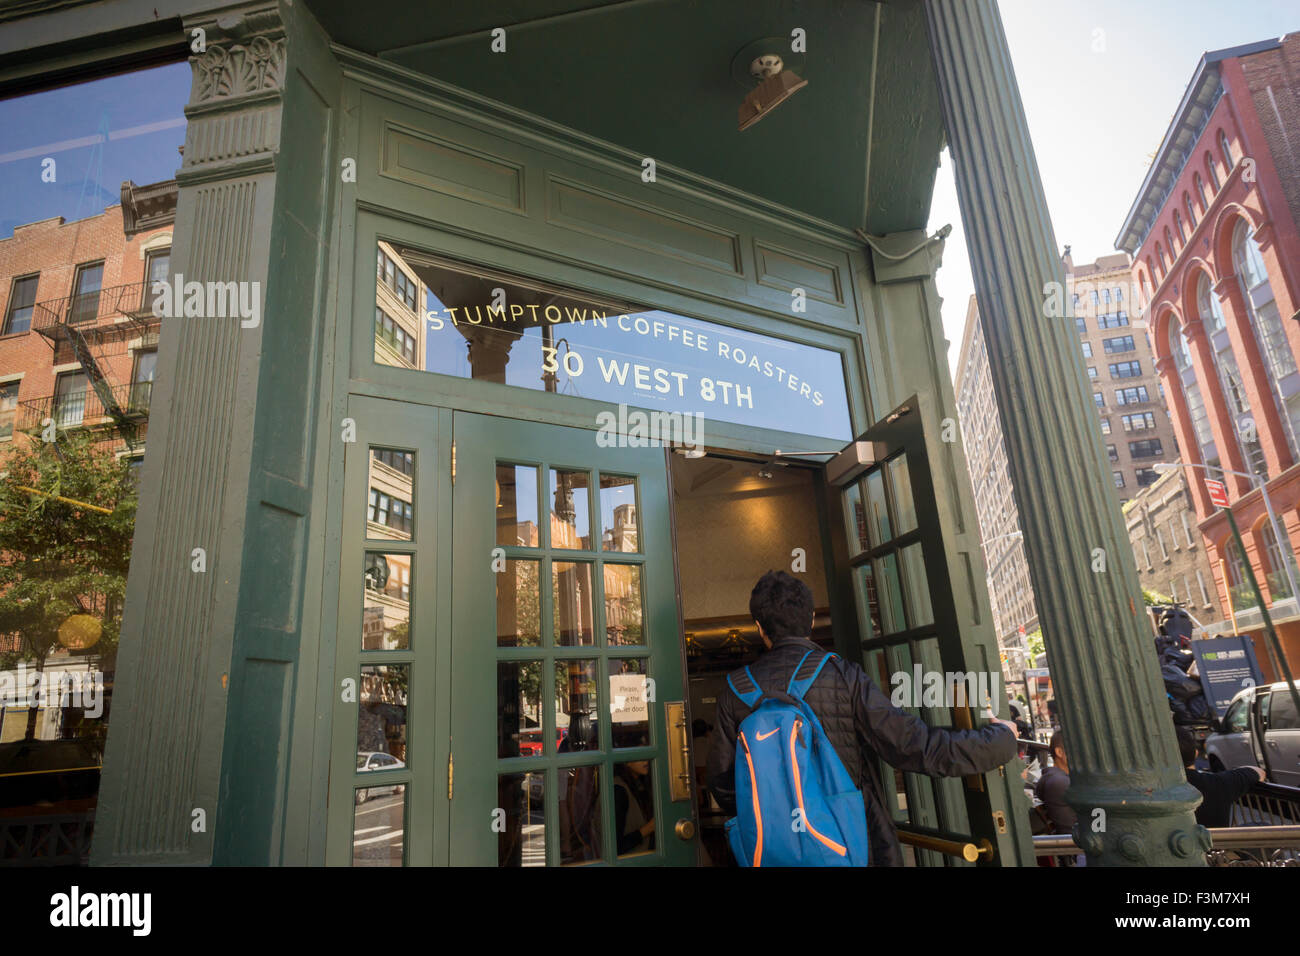 A branch of Stumptown Coffee Roasters in Greenwich Village in New York on Wednesday, October 7, 2015. Peet's Coffee & Tea has bought Stumptown Coffee Roasters for an undisclosed sum. Stumptown has a cult-like following and the two brands are expected to operate independently. (© Richard B. Levine) Stock Photo